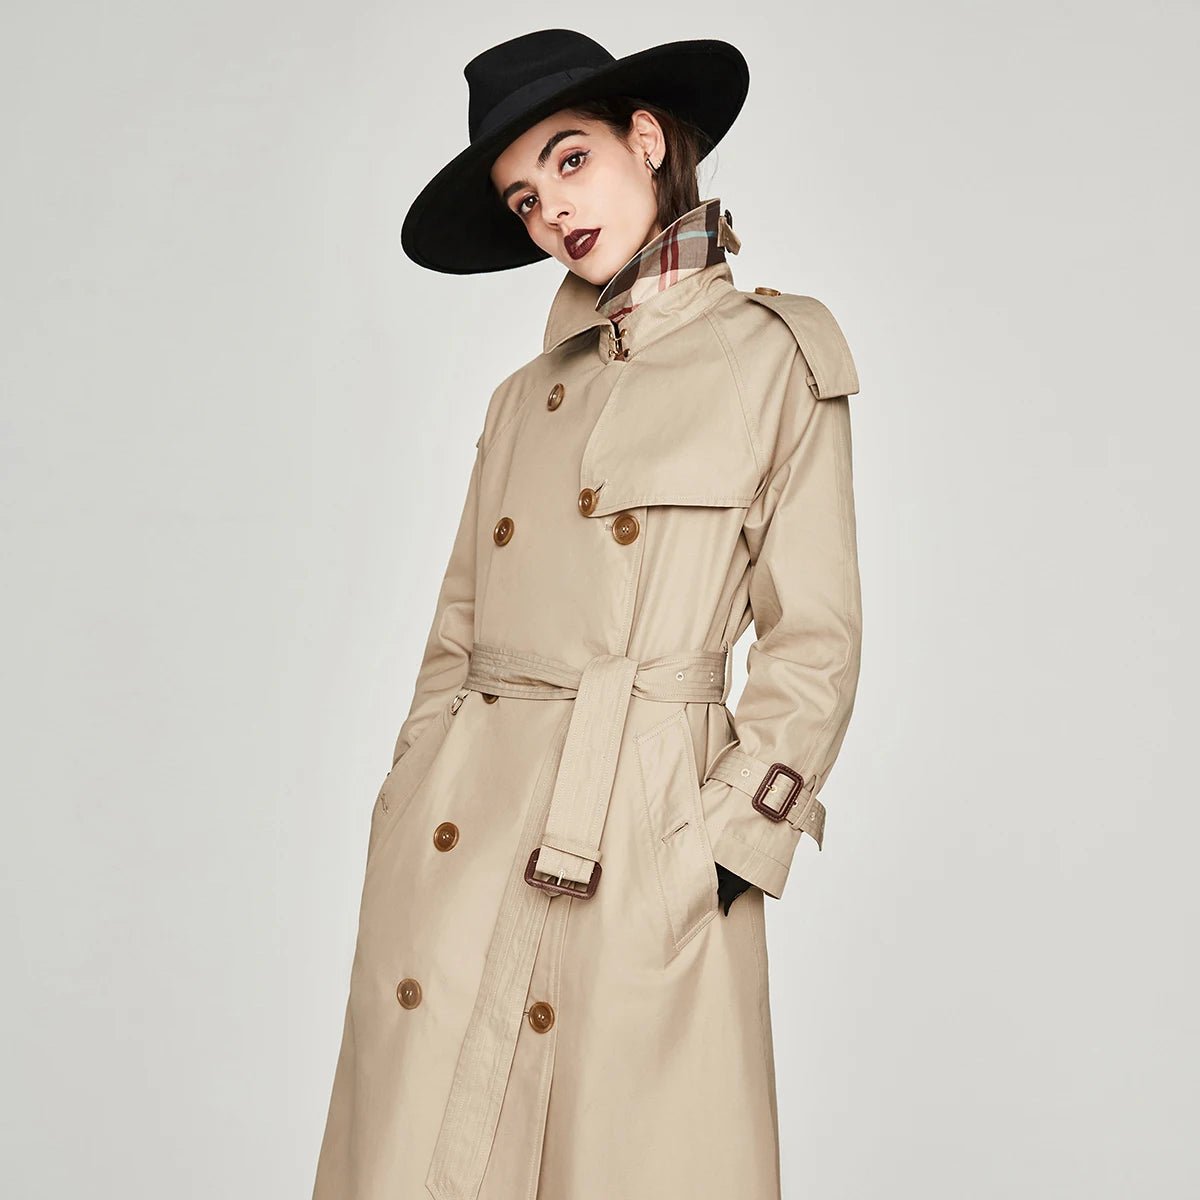 Khaki High quality Spring new fashion style trench coat British style thin wild small high school trench coat women - Guy Christopher